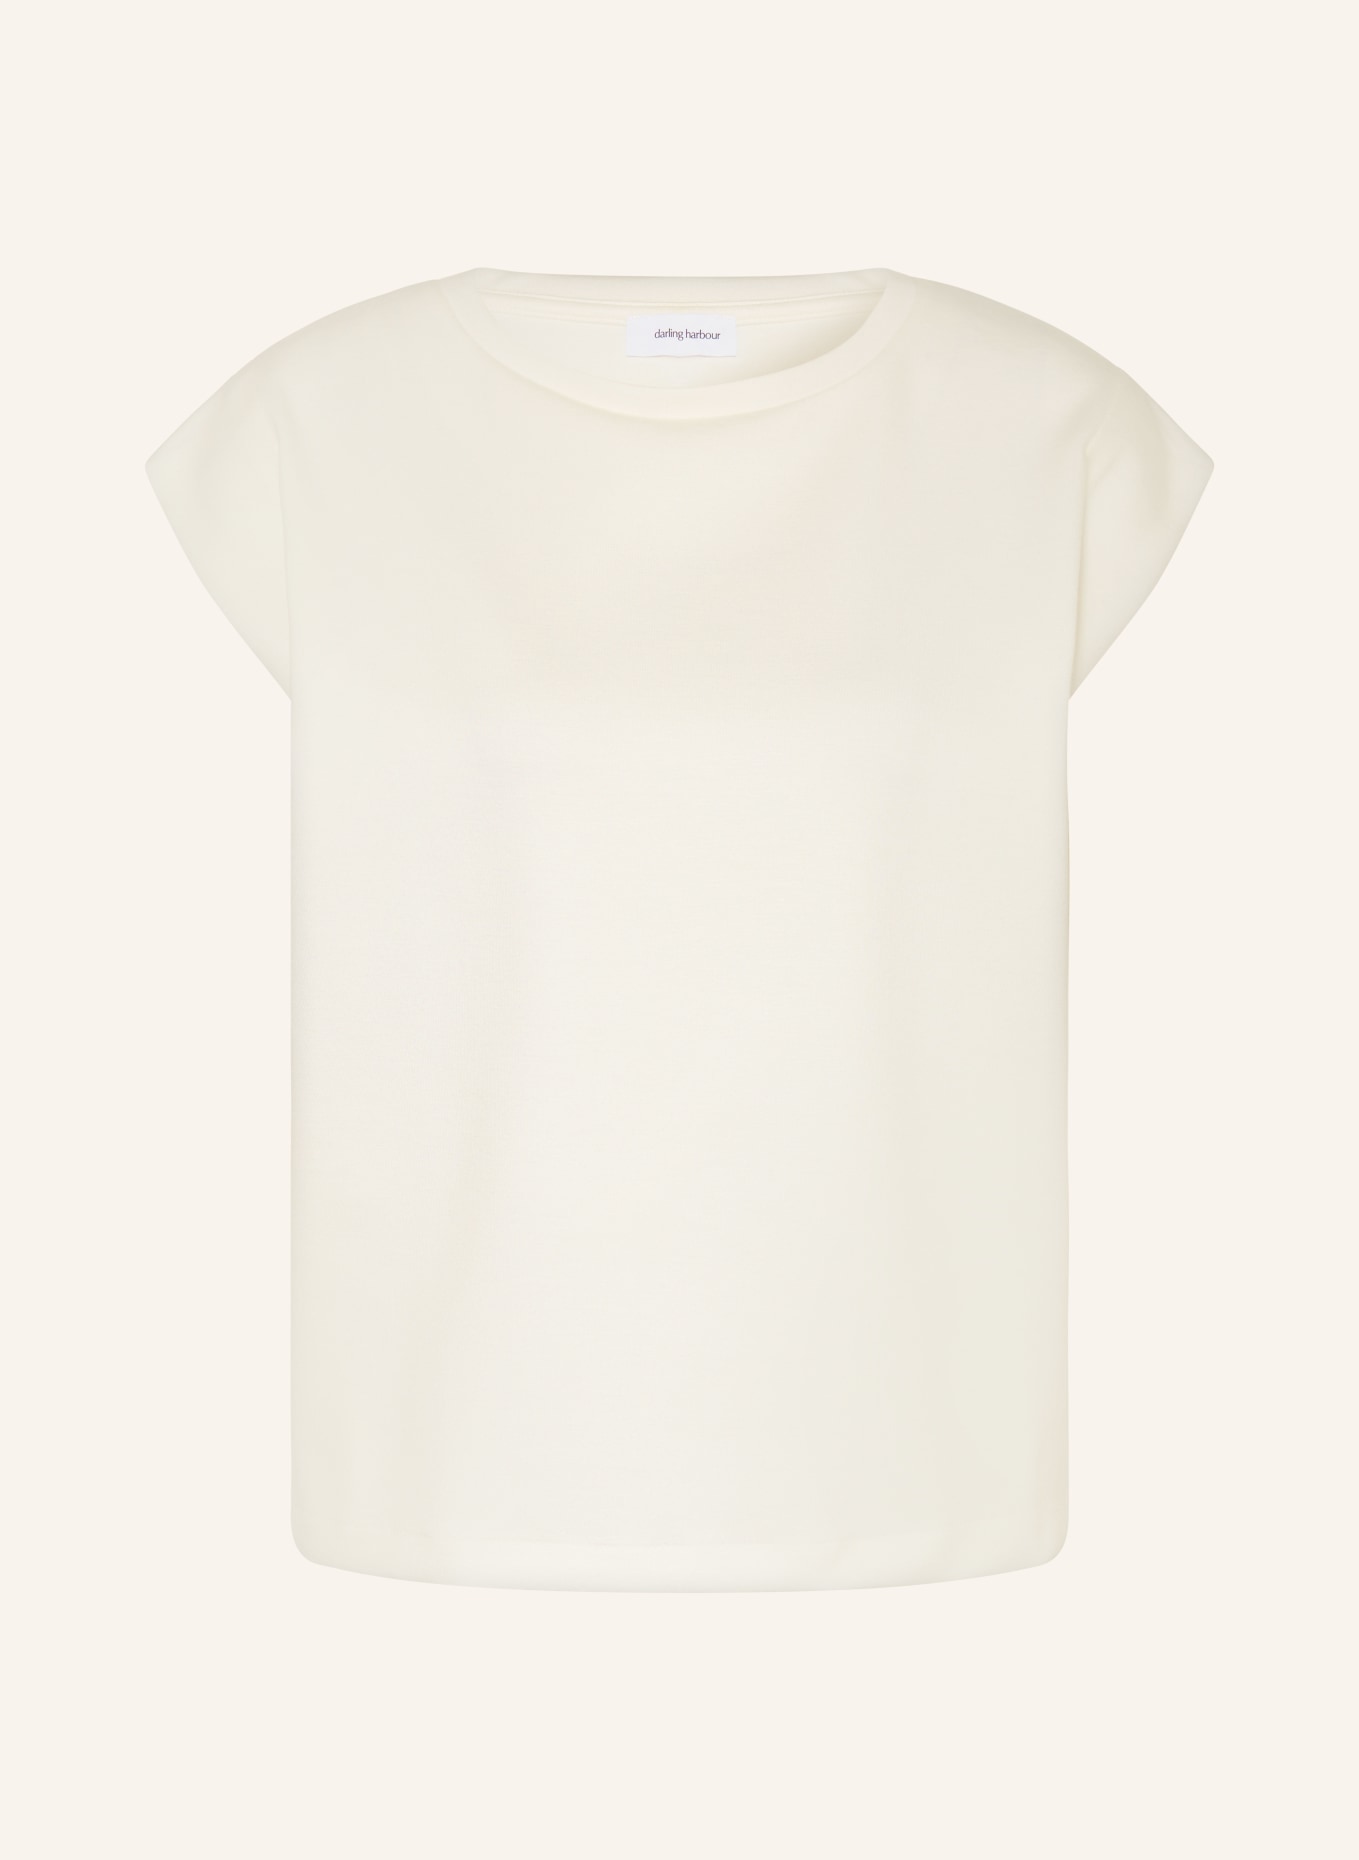 darling harbour Top, Farbe: OFFWHITE (Bild 1)